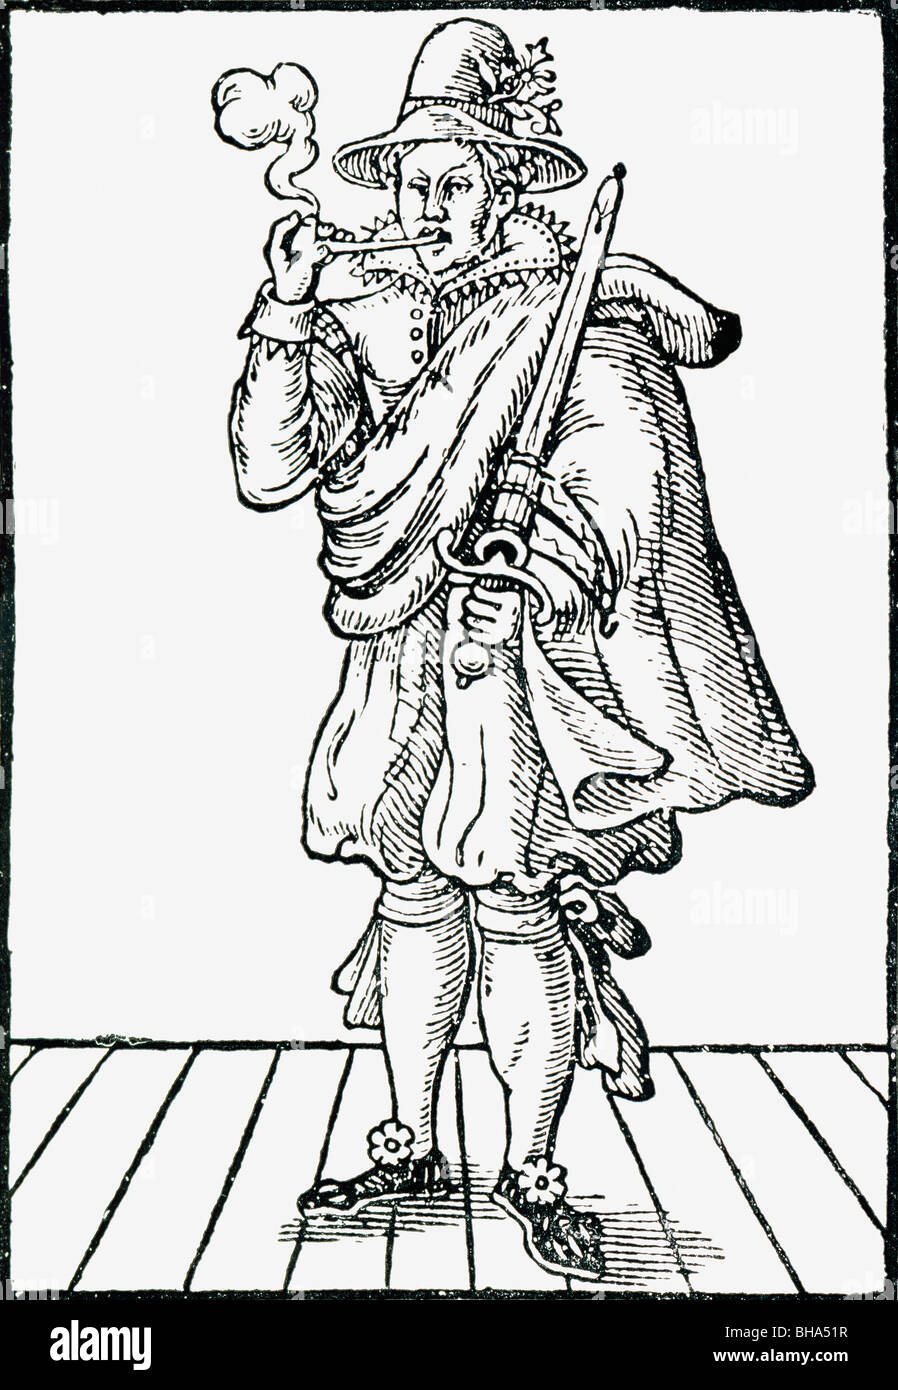 Facsimilie of image of Mary Frith from title page of The Roaring Girl. Mary Frith or Moll Cutpurse c. 1584 to 1659. Stock Photo